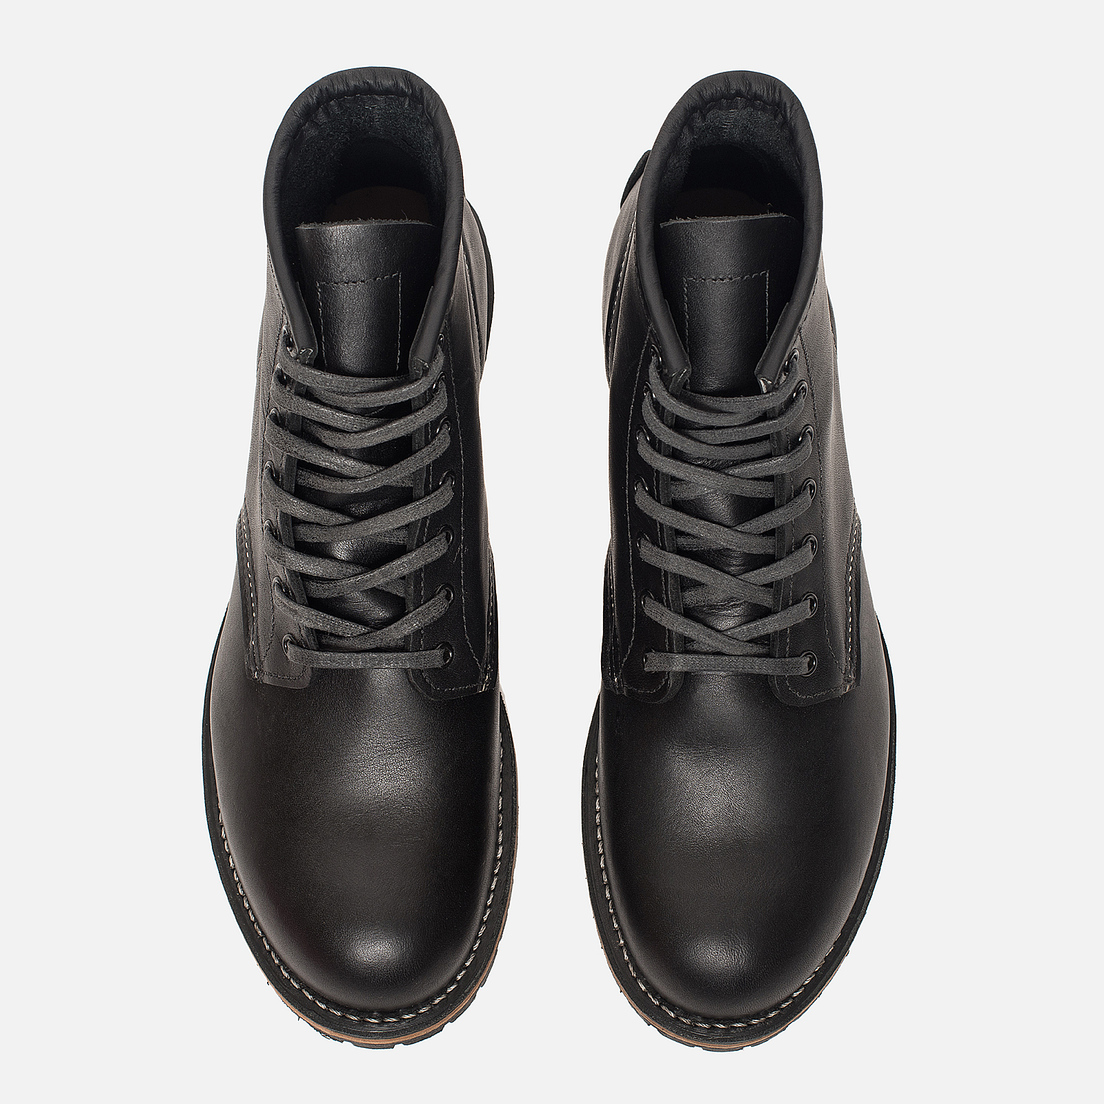 Red Wing Shoes Мужские ботинки 9014 Beckman Round Leather